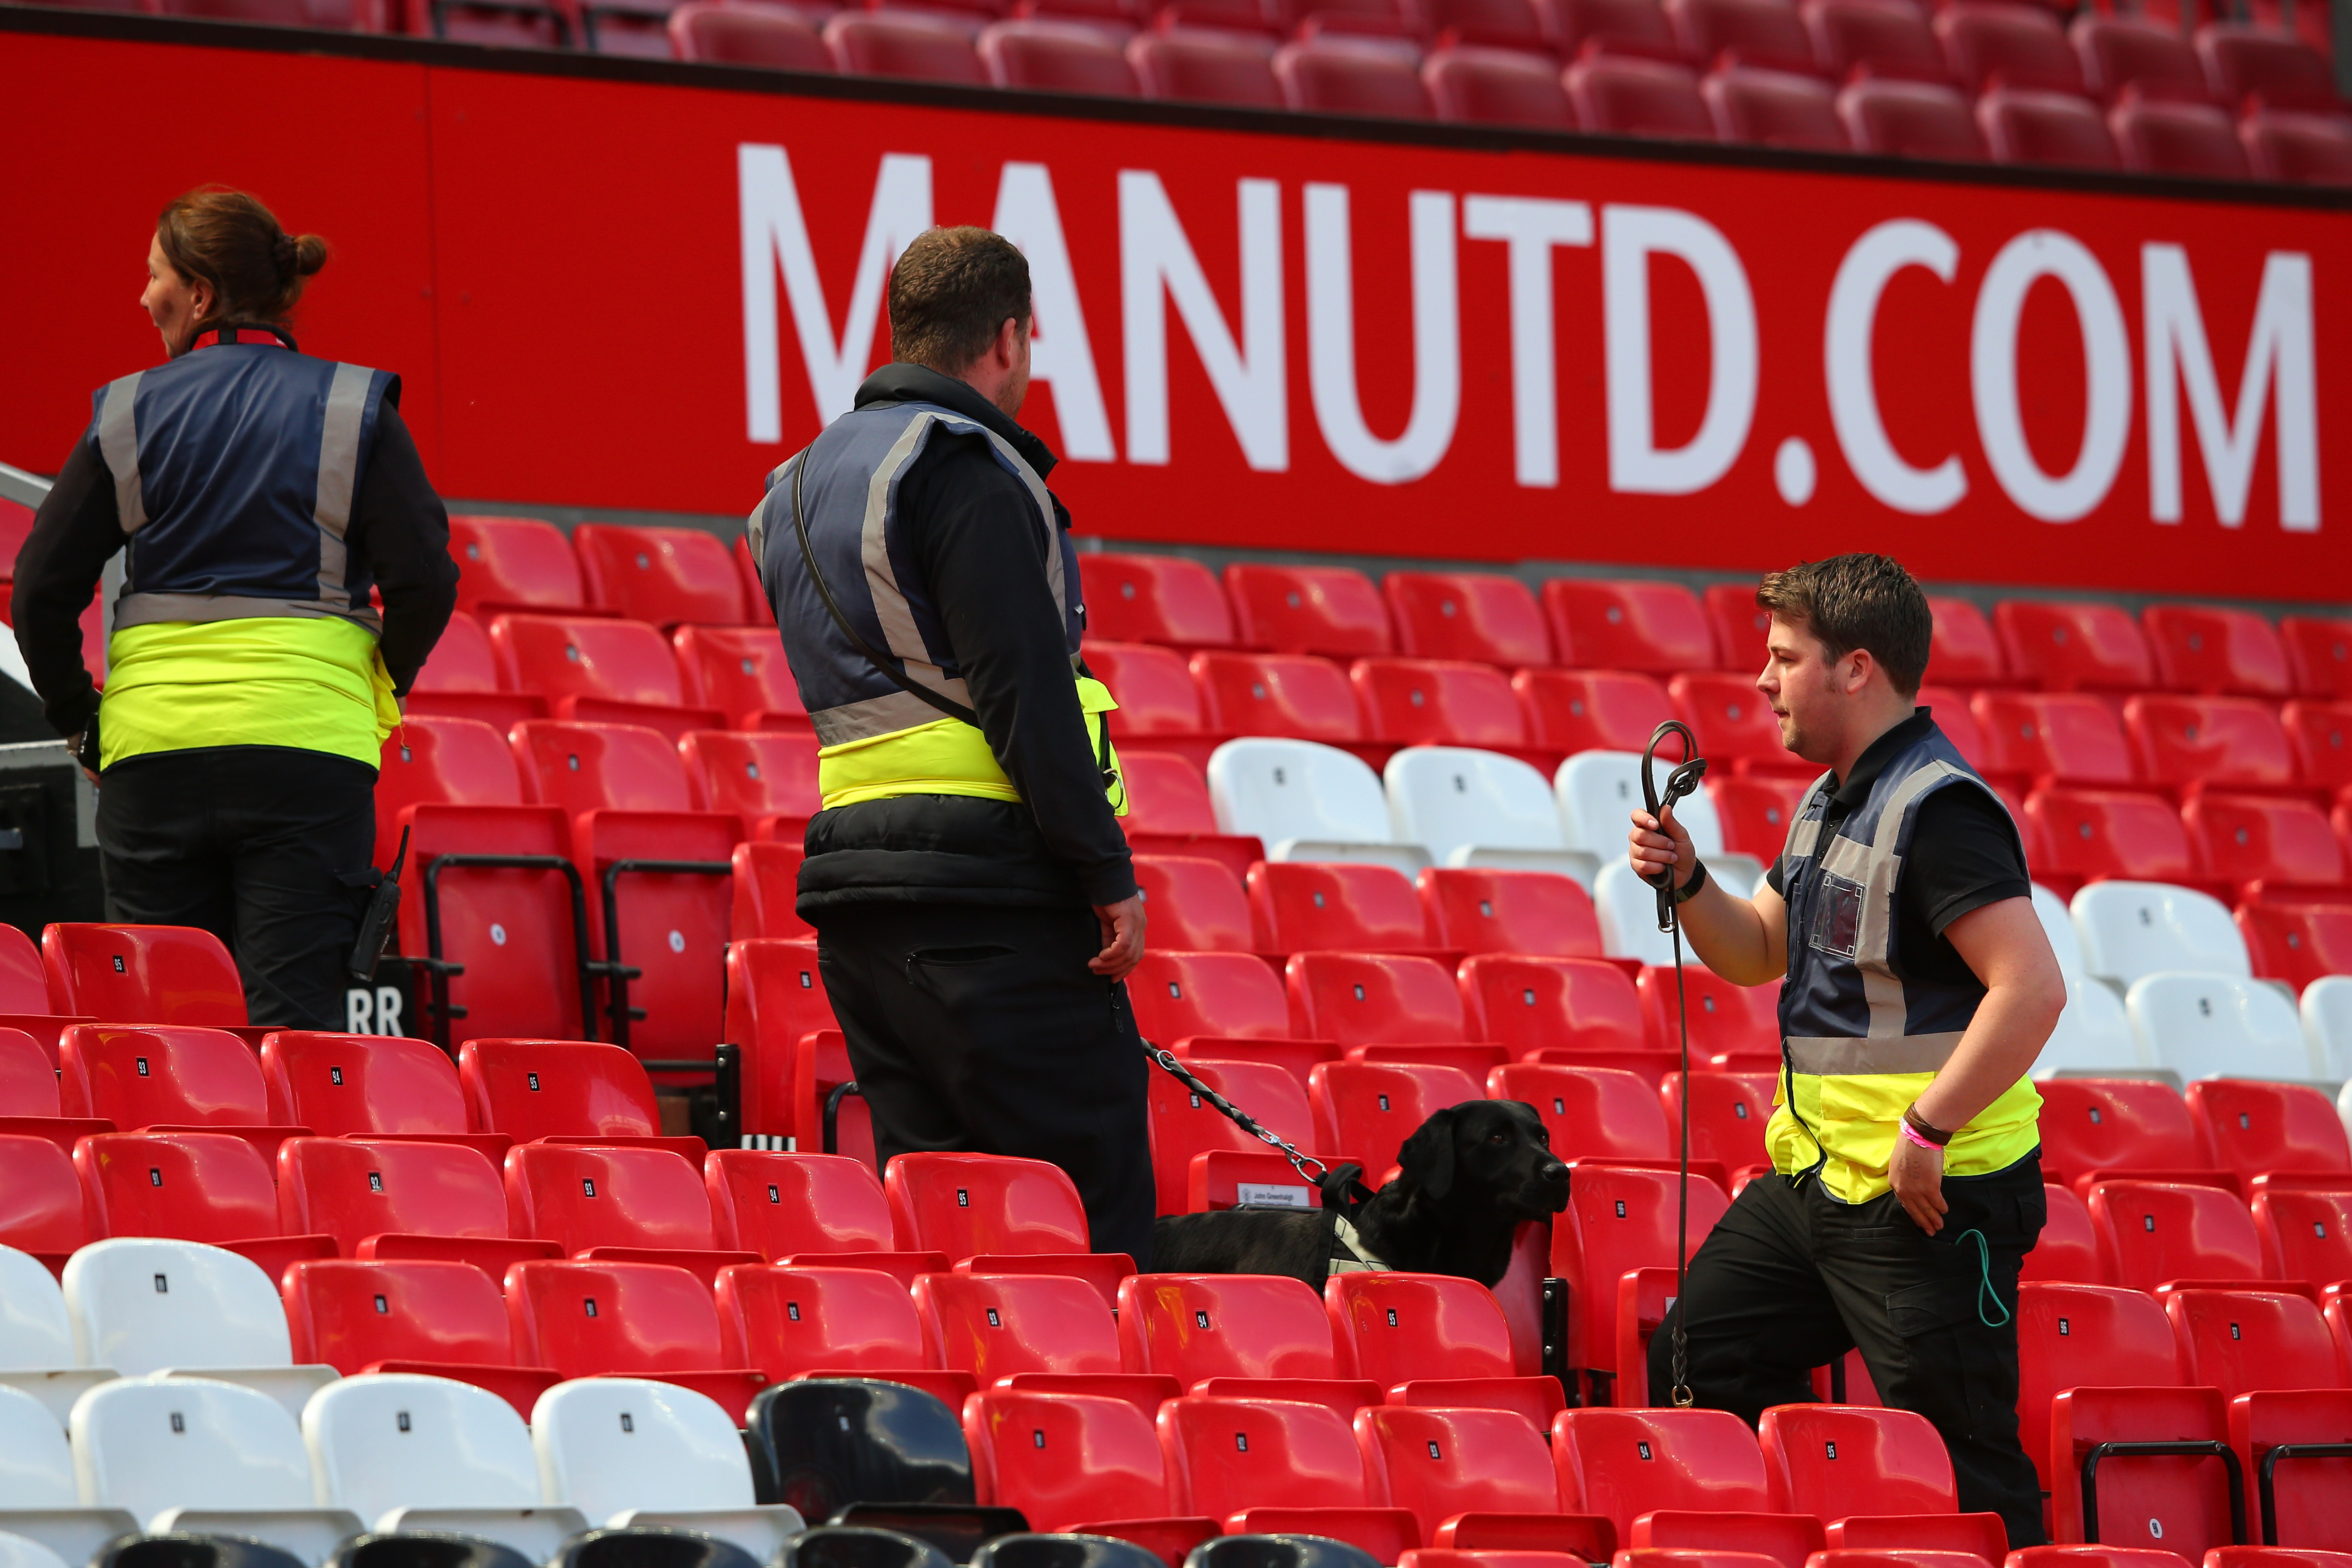 A sniffer dog patrols the stands prior to the match being abandoned with fans evacuated from the ground prior to the Barclays Premier League match between Manchester United and AFC Bournemouth at Old Trafford on May 15, 2016. (Getty)